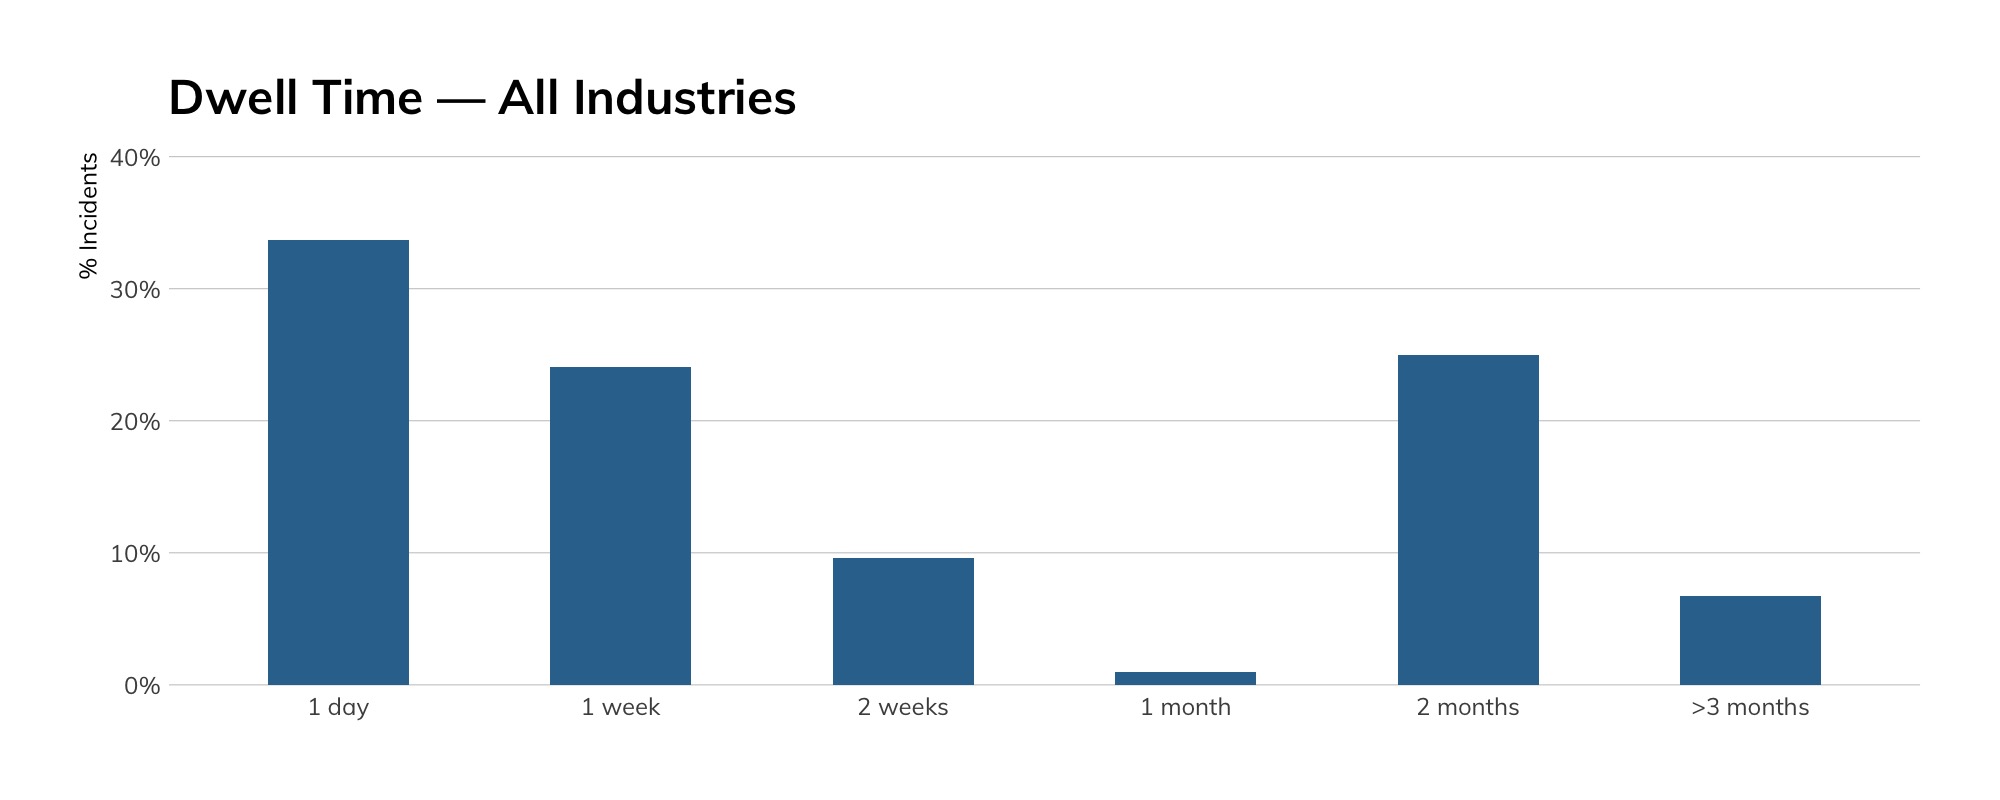 Figure 11: Dwell Time—All Industries